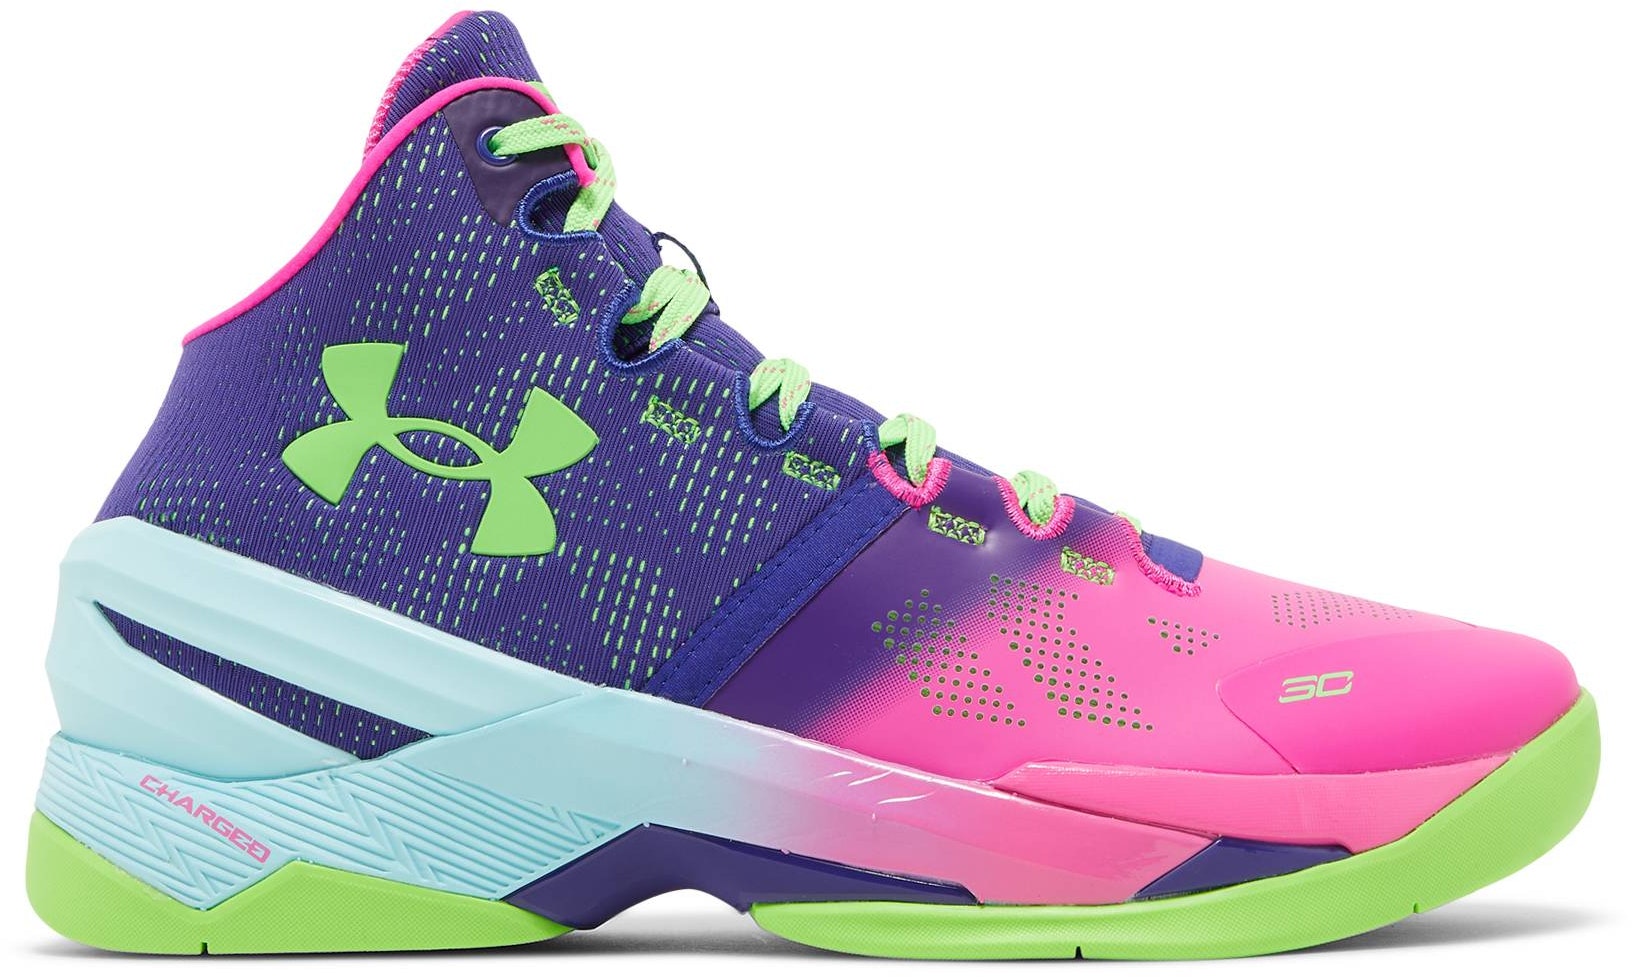 Under Armour Curry 2 Retro 'Northern Lights' 2022 - 3026052-600 - Novelship